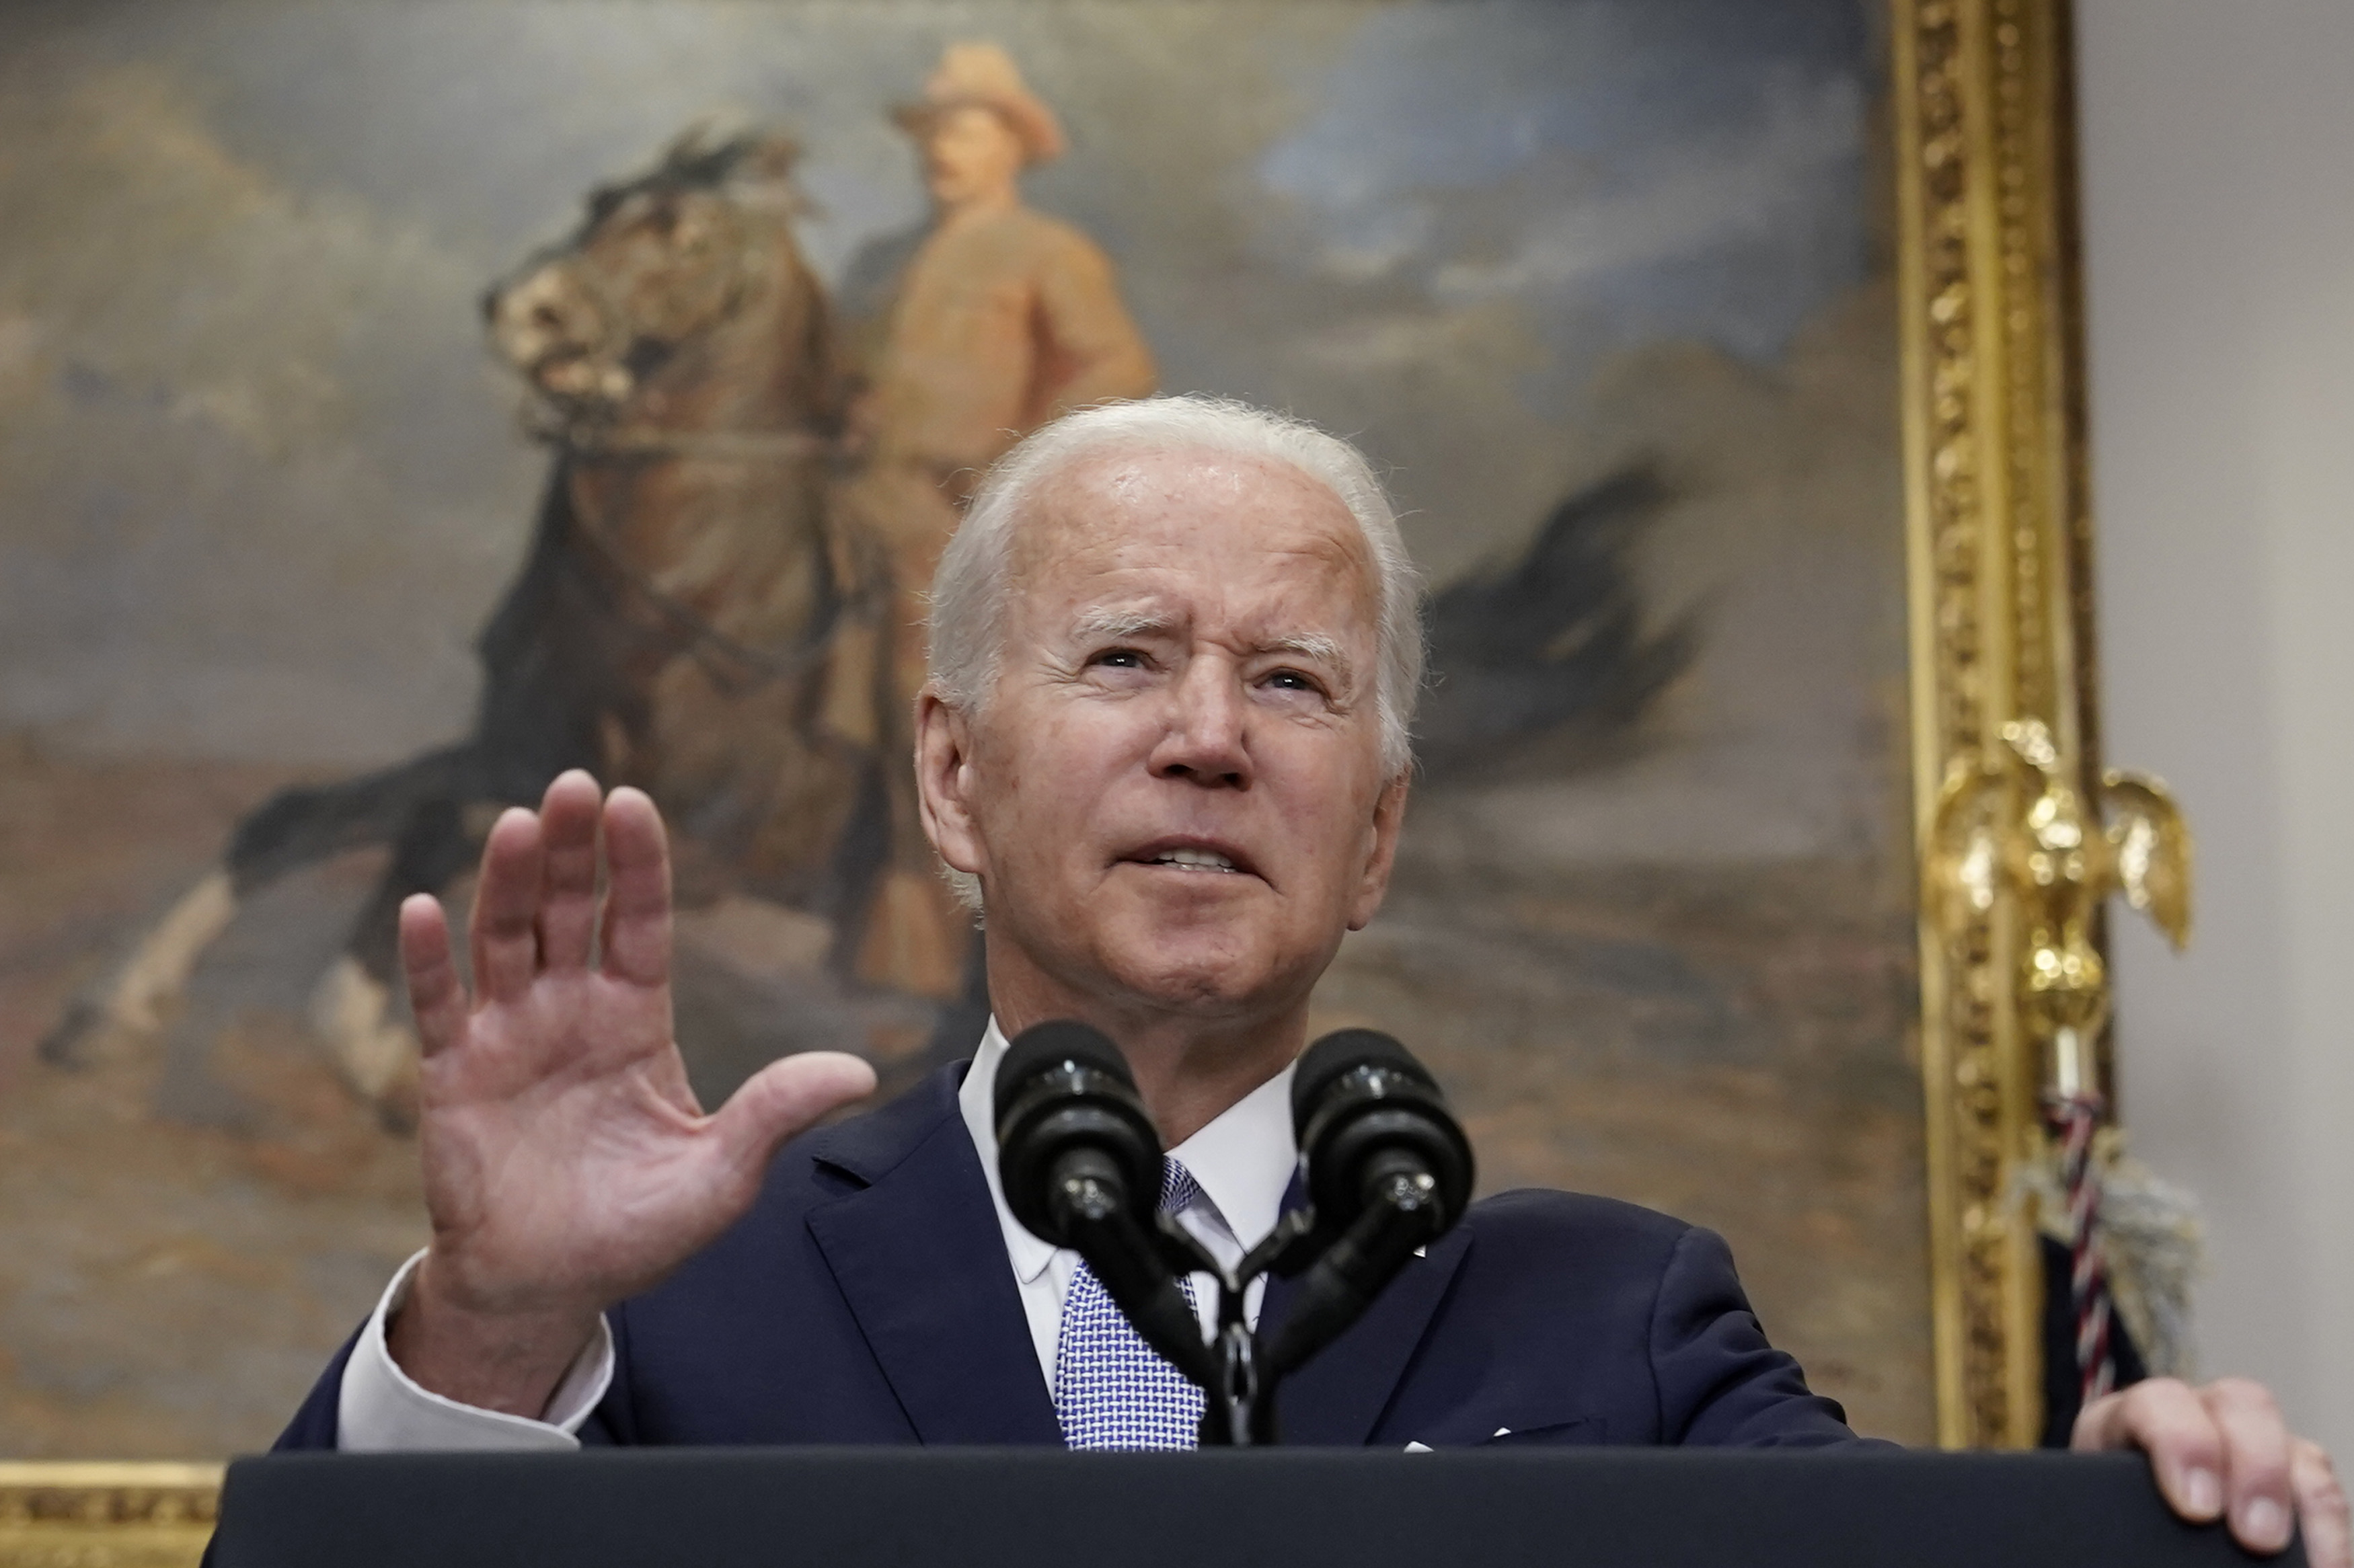 President Biden speaking into microphones in front of a picture of Teddy Roosevelt on a horse.